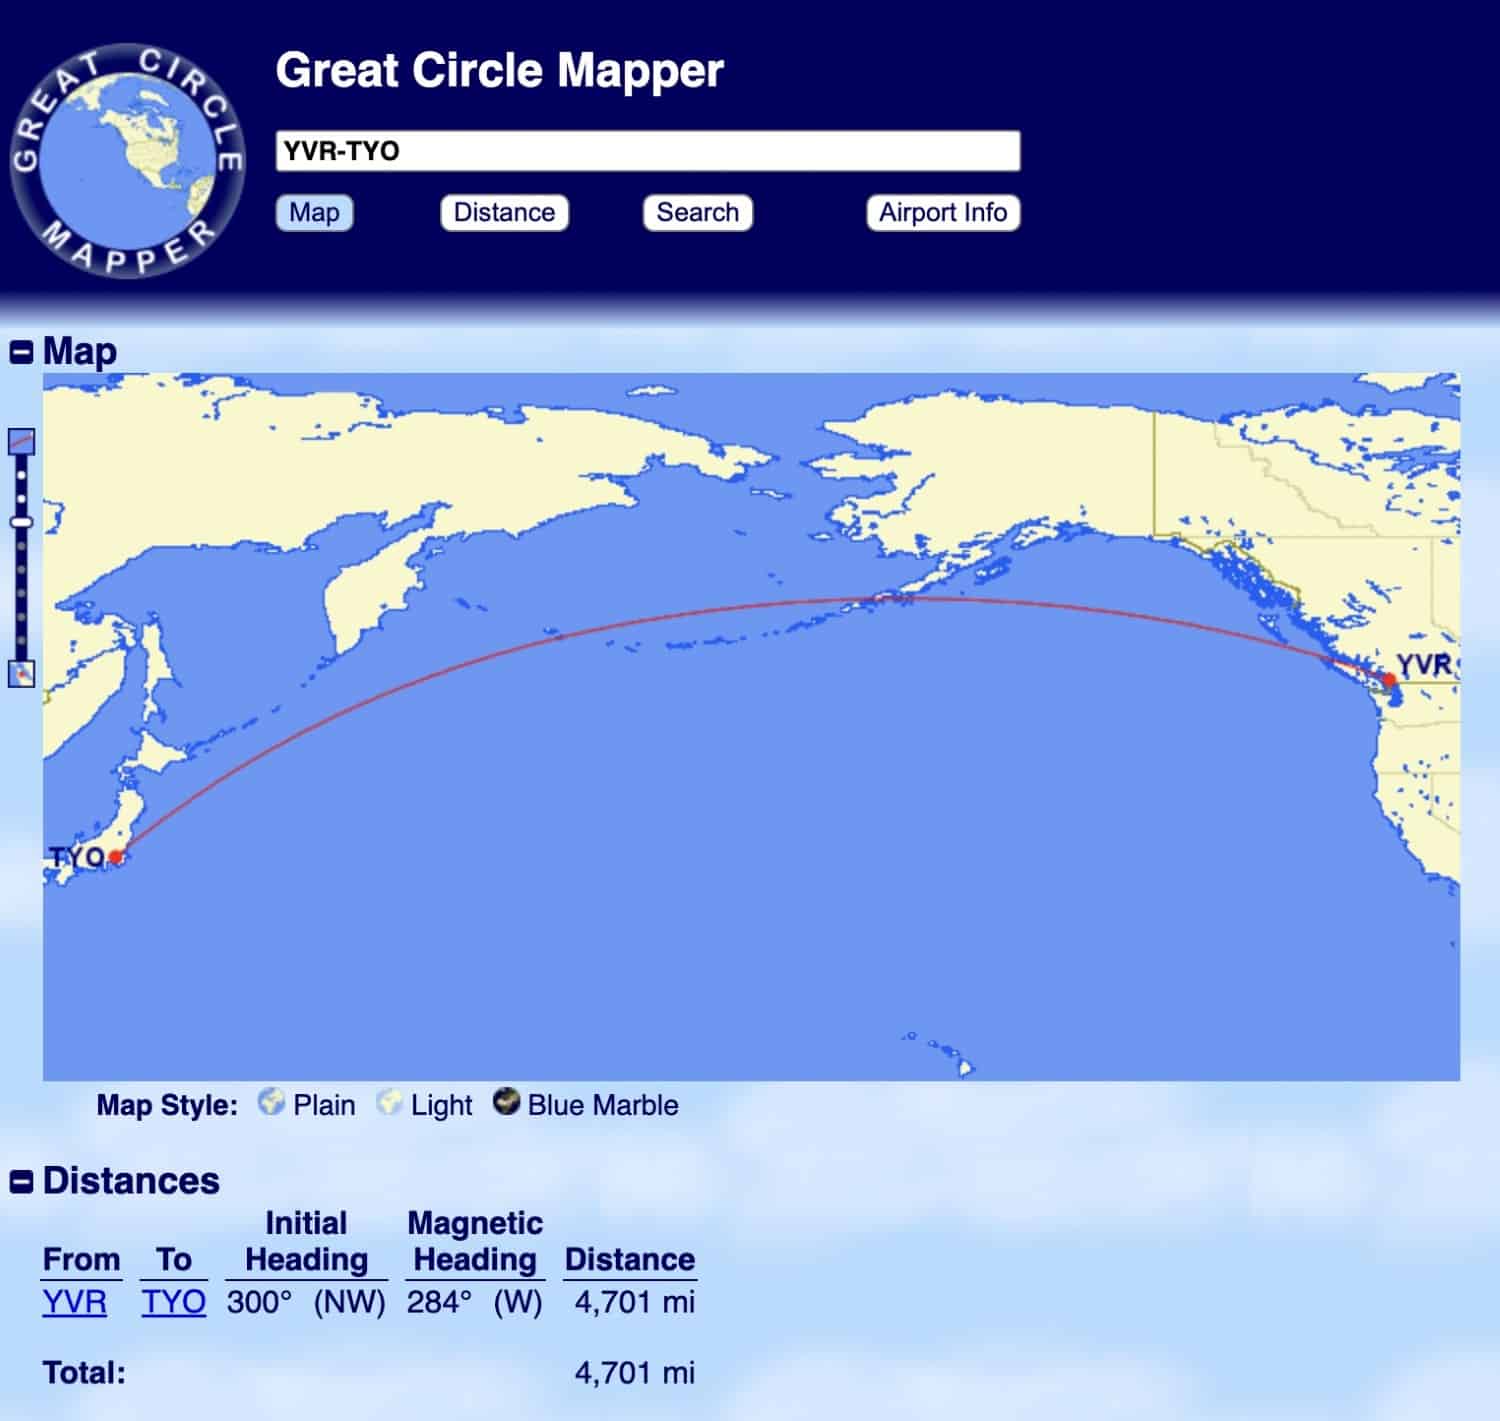 vancouver to tokyo distance on great circle mapper